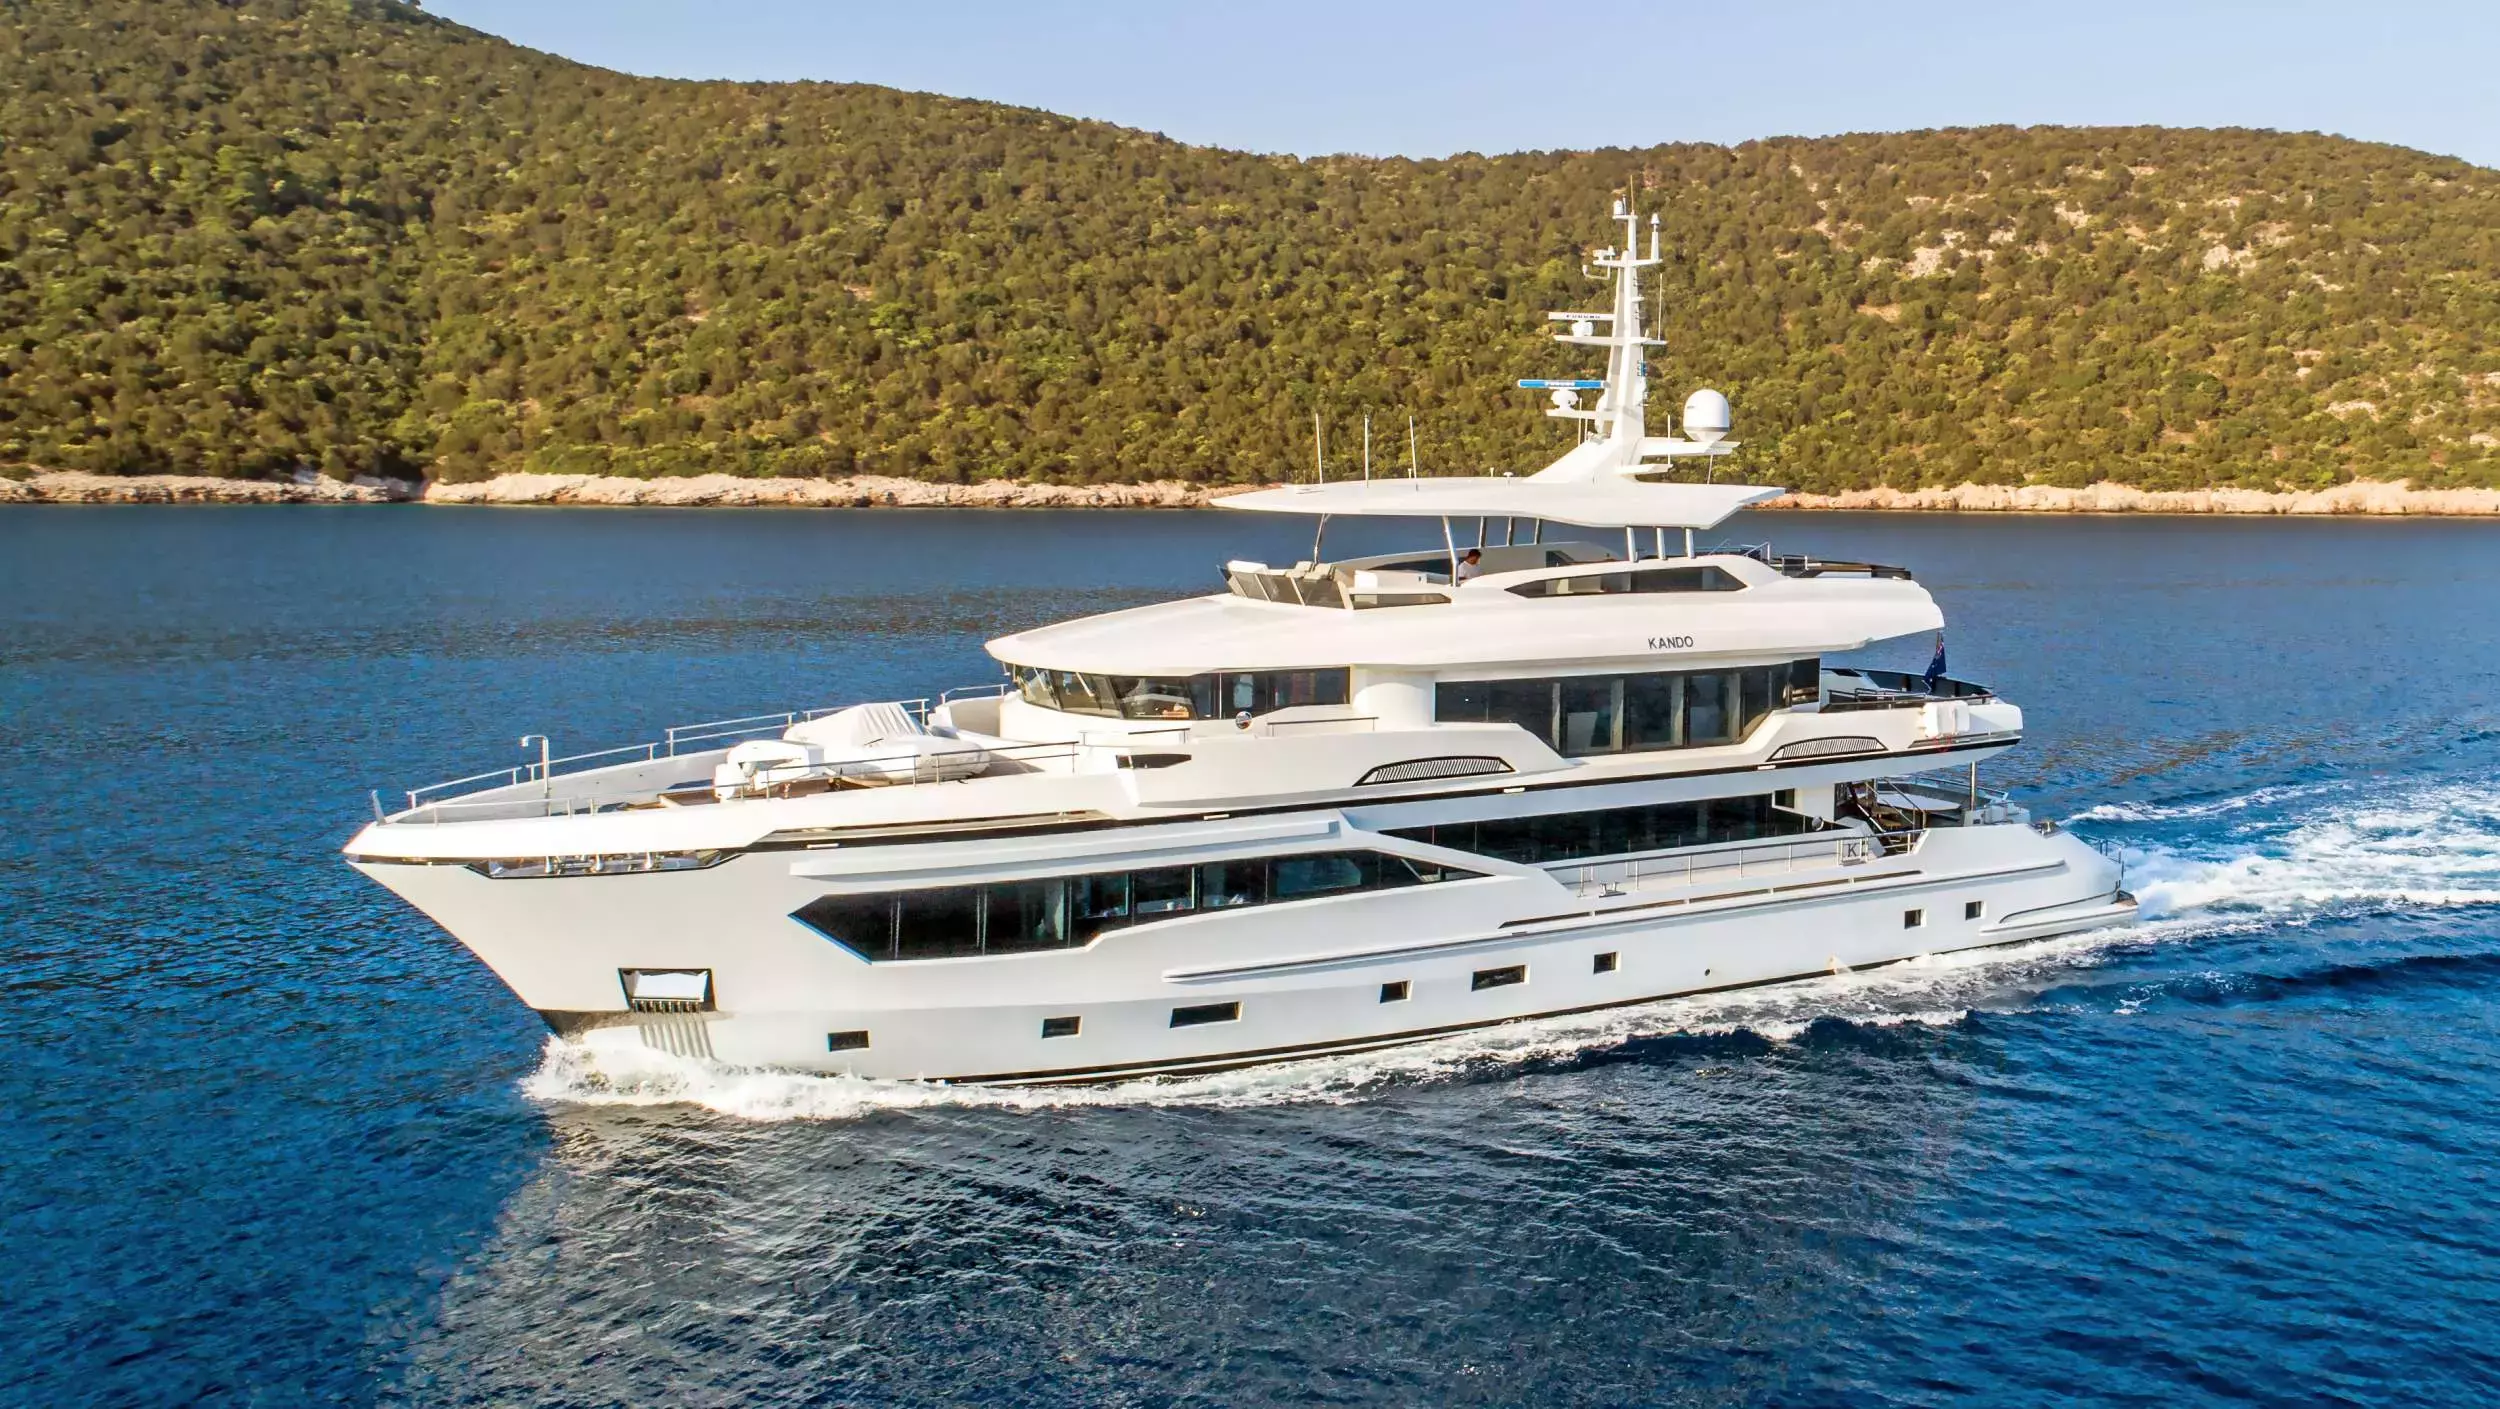 Kando by Custom Made - Top rates for a Charter of a private Motor Yacht in Greece